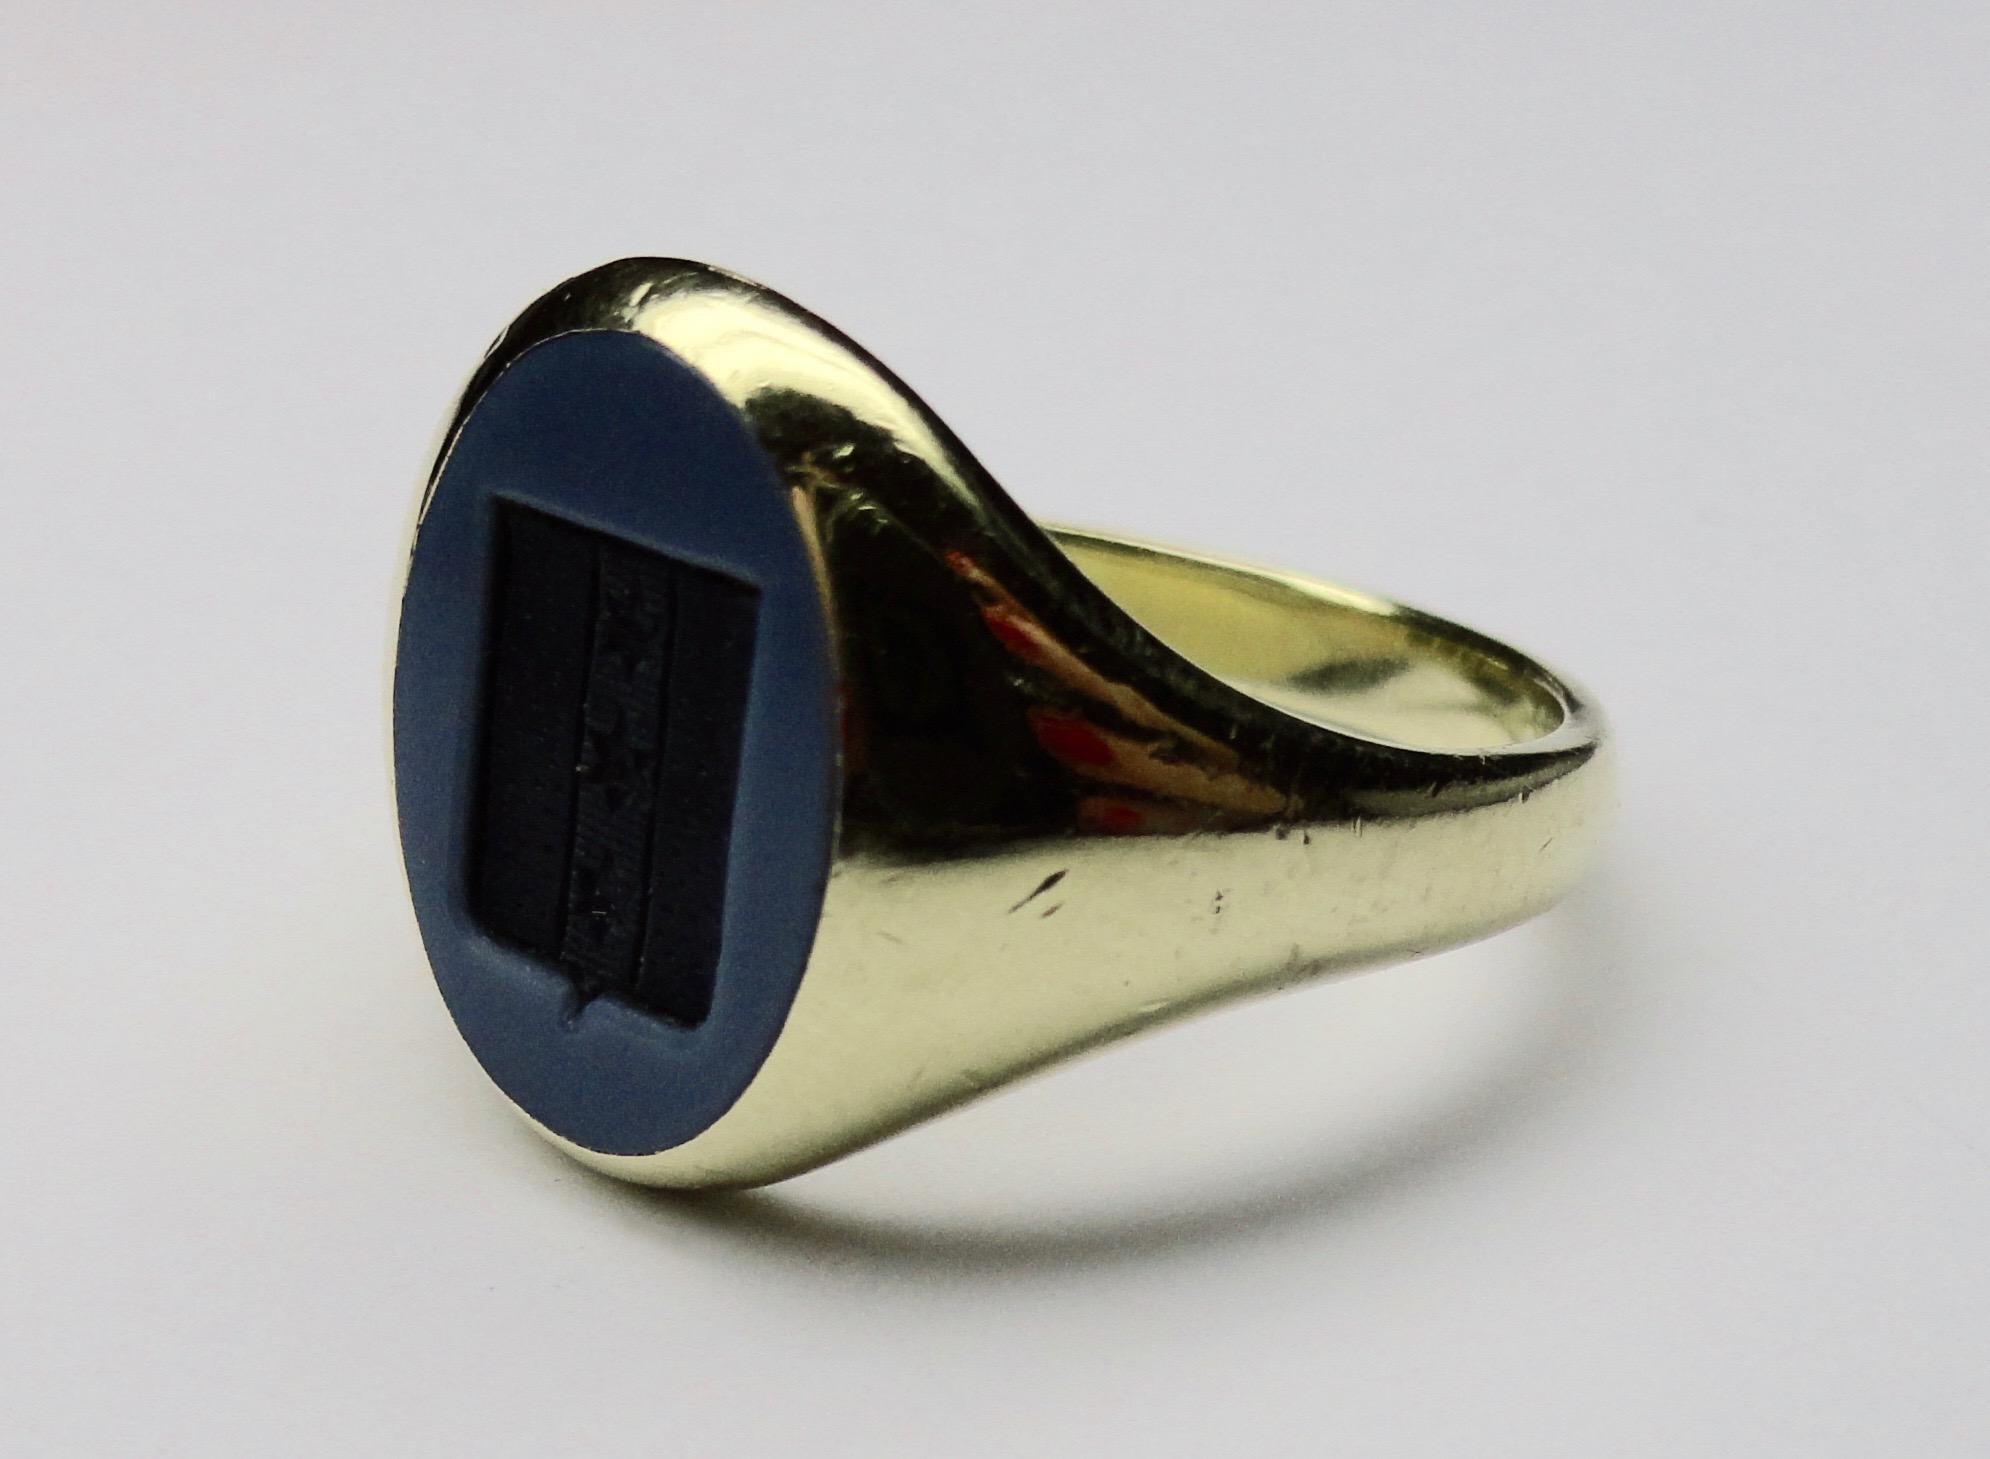 Oval Cut Intaglio Agate Ring Medium Size 18 Carat Gold For Sale